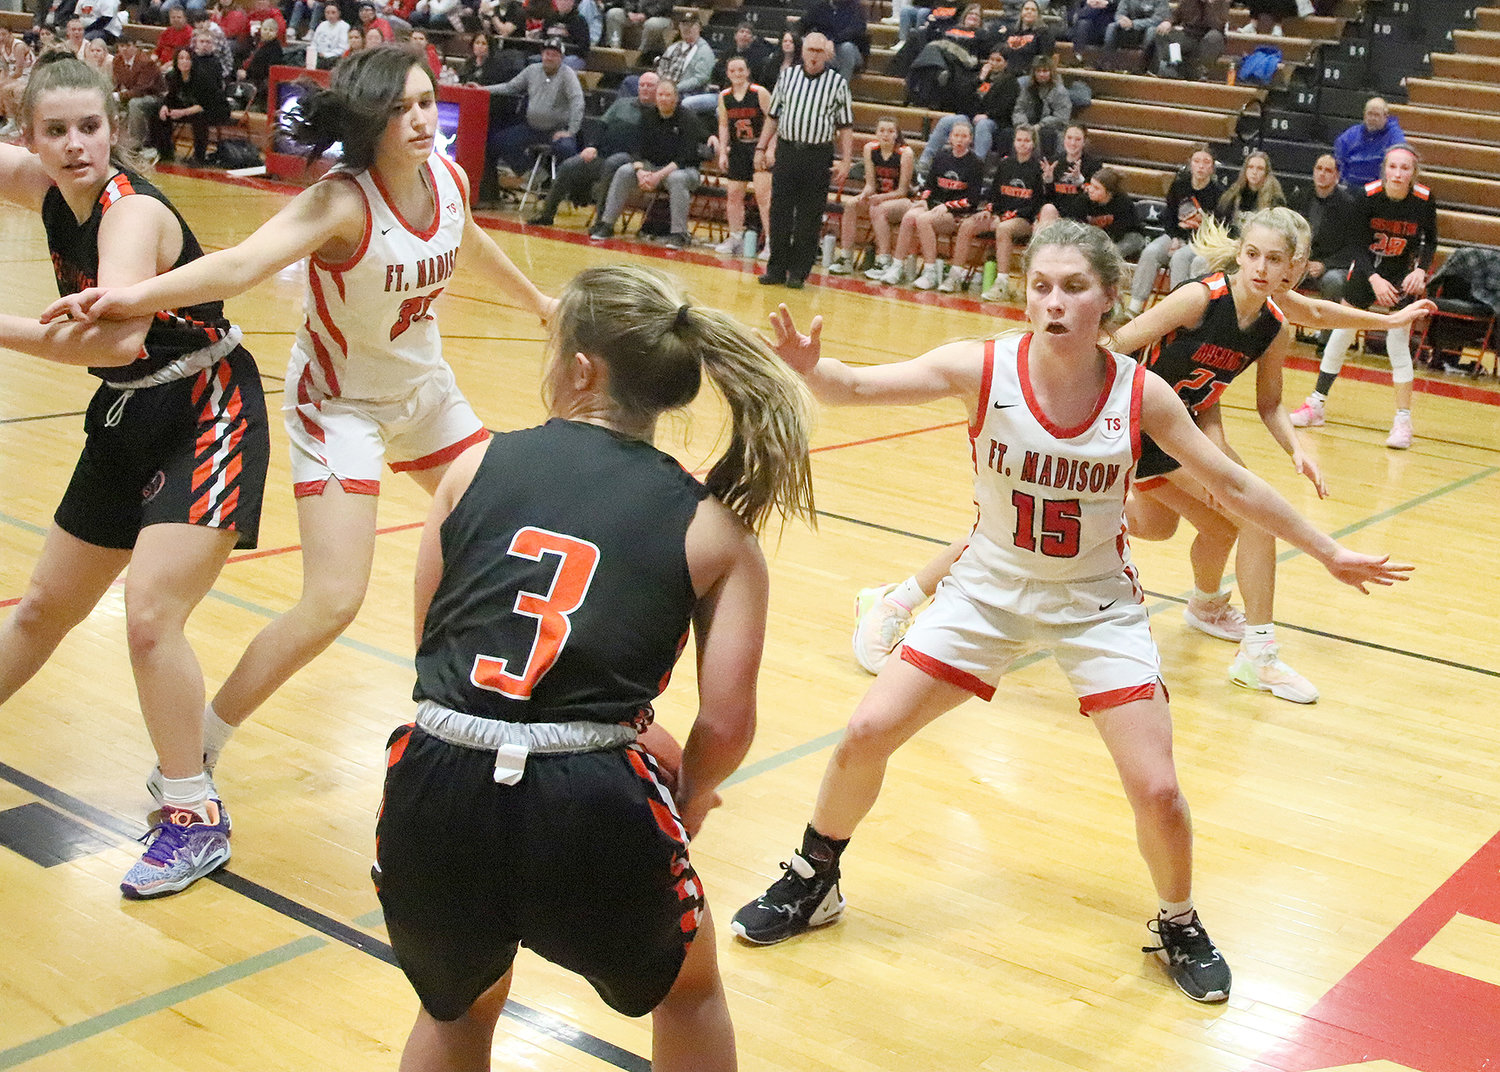 The Lady Hounds Irelynd Sargent (15) cuts off Washington's Makenna Conrad at the baseline in the 4th quarter of Tuesday's game in Fort Madison